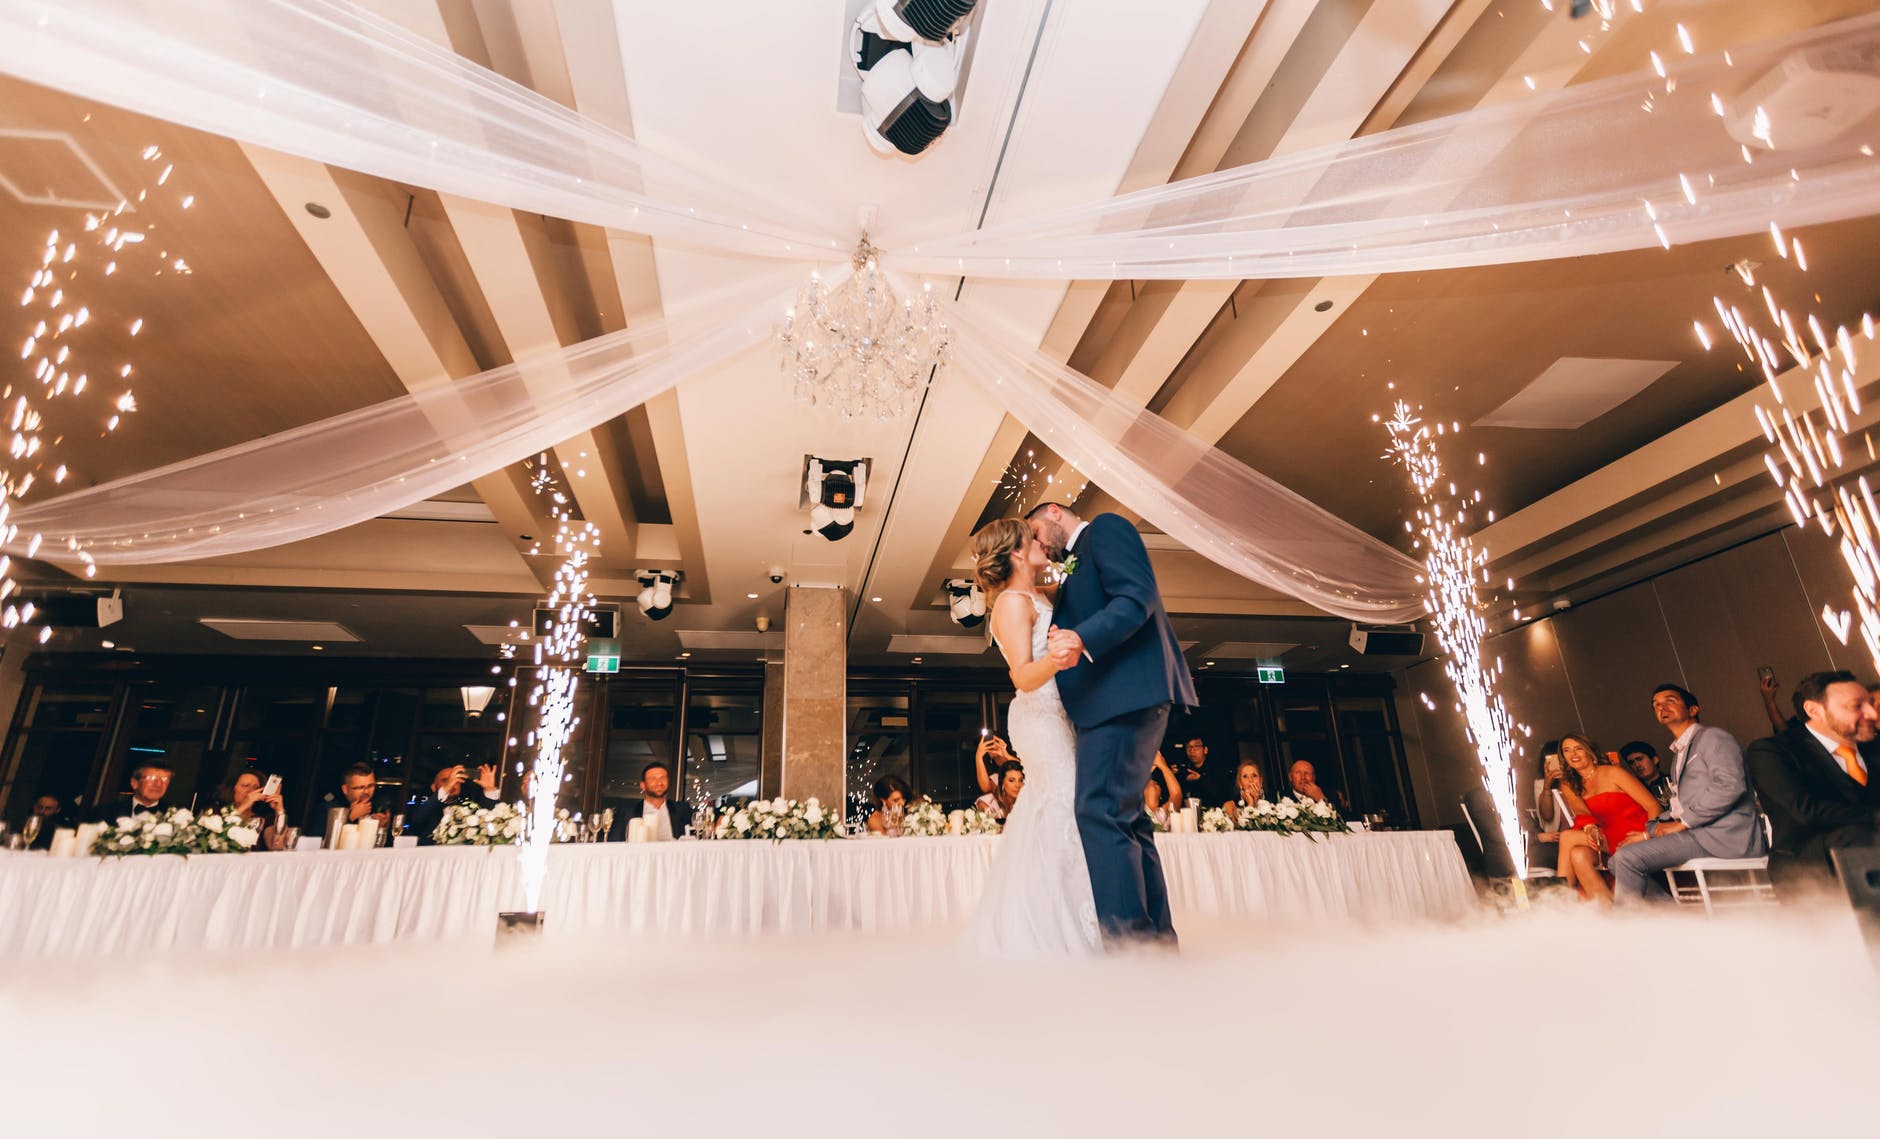 how the first dance at the wedding should be